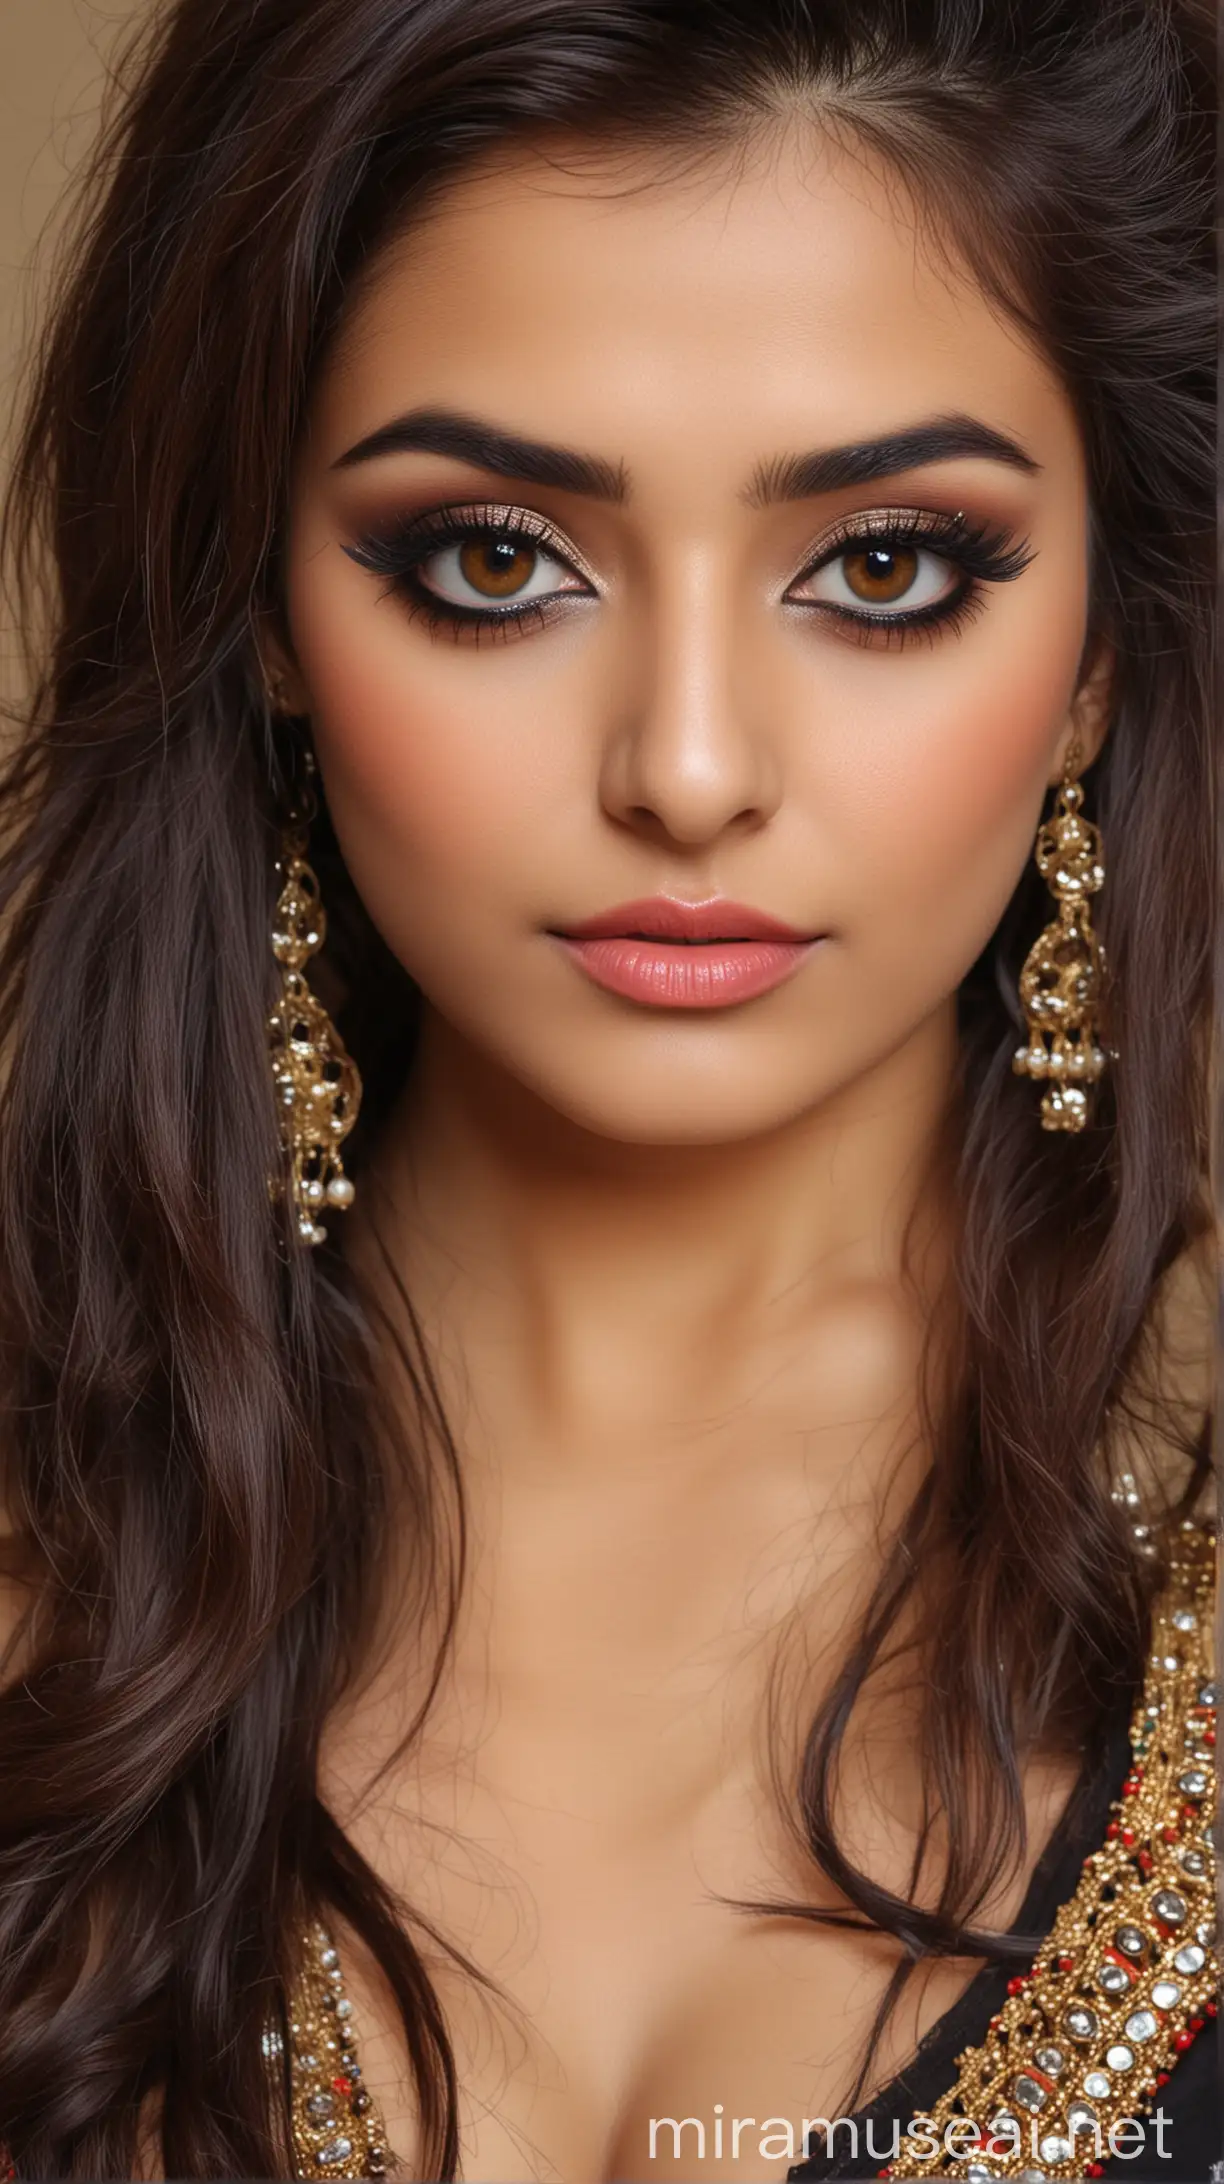 Extreme beautiful Pakistani women,,cute face,,extreme model,,Indian makeup,,hairstyle,,half body photo,,attractive body 